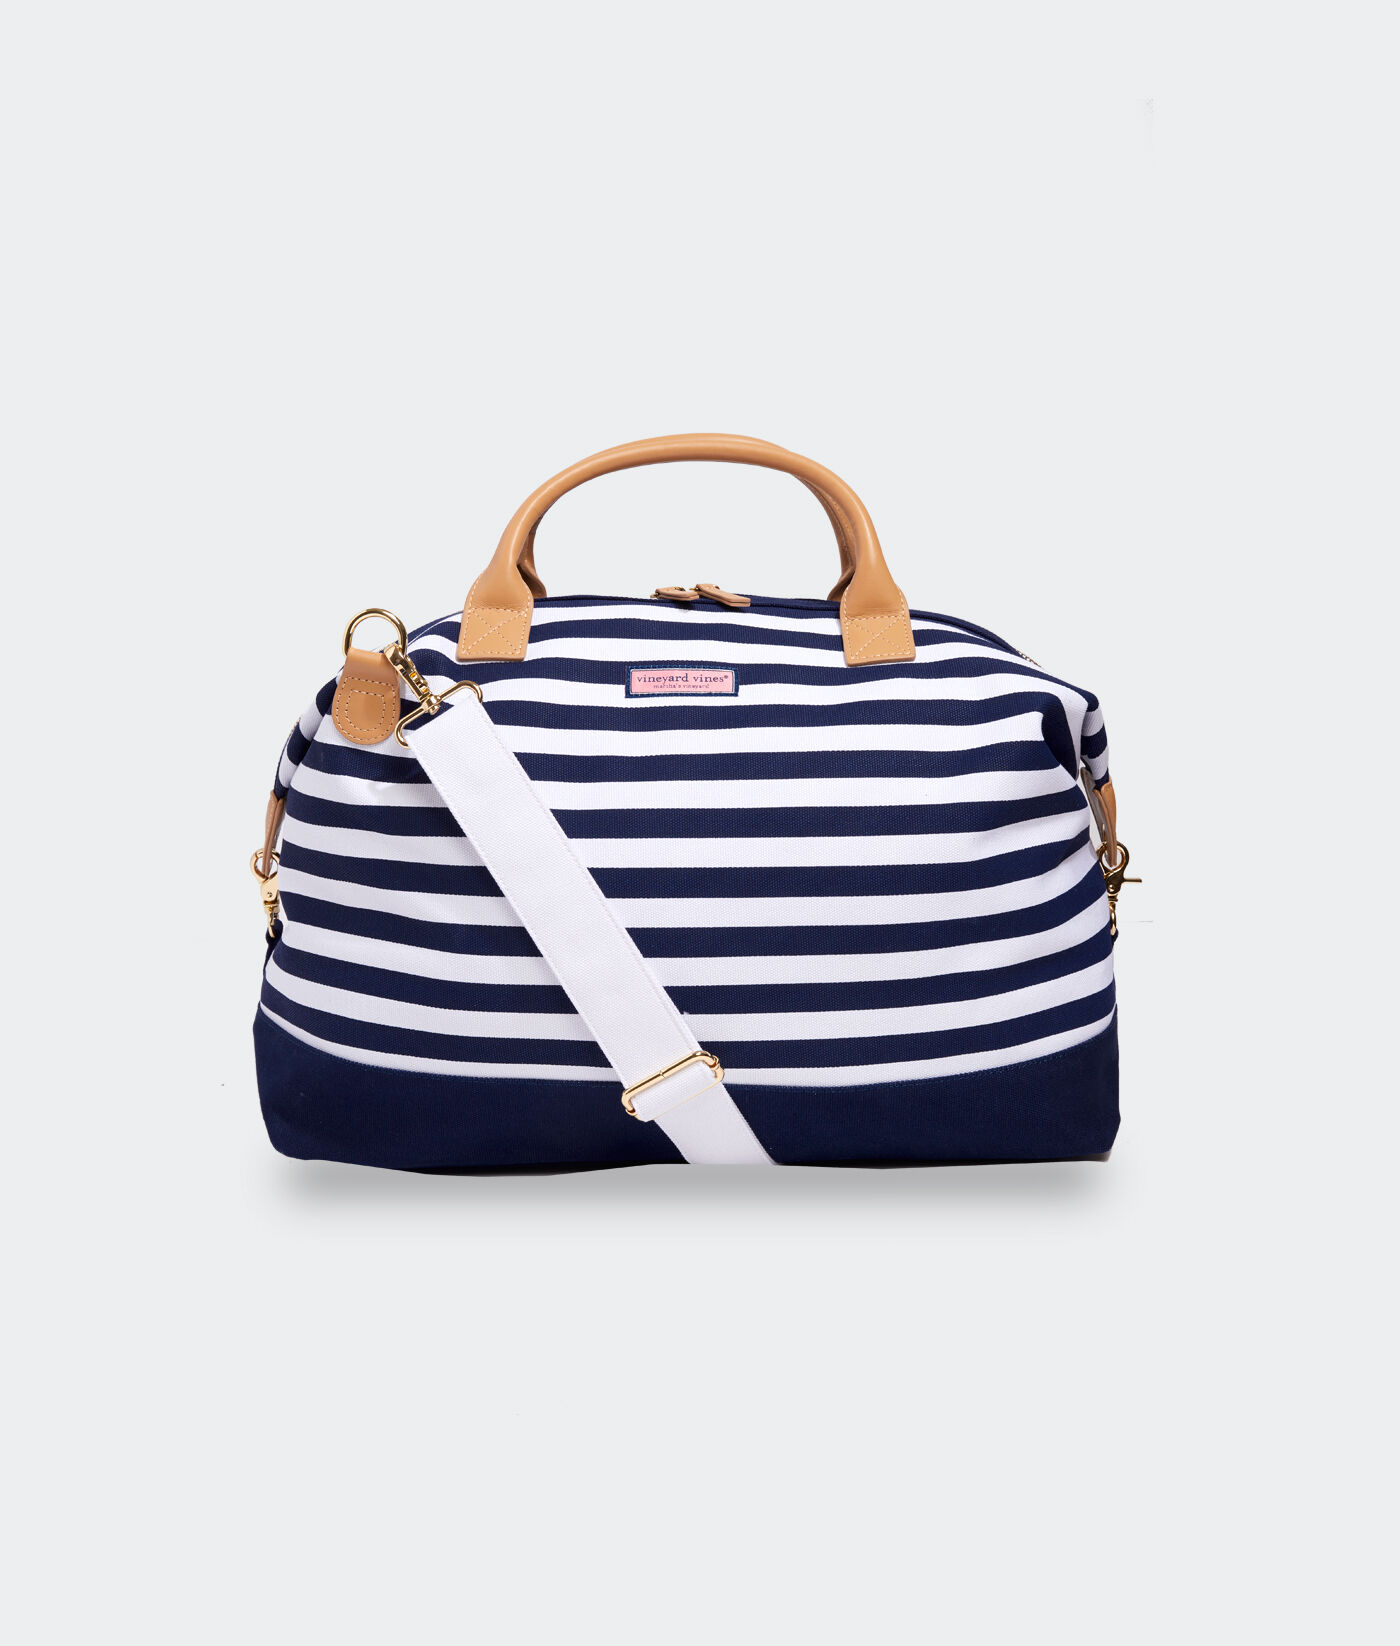 DSW Exclusive Free Striped Weekender Bag - Free Shipping | DSW